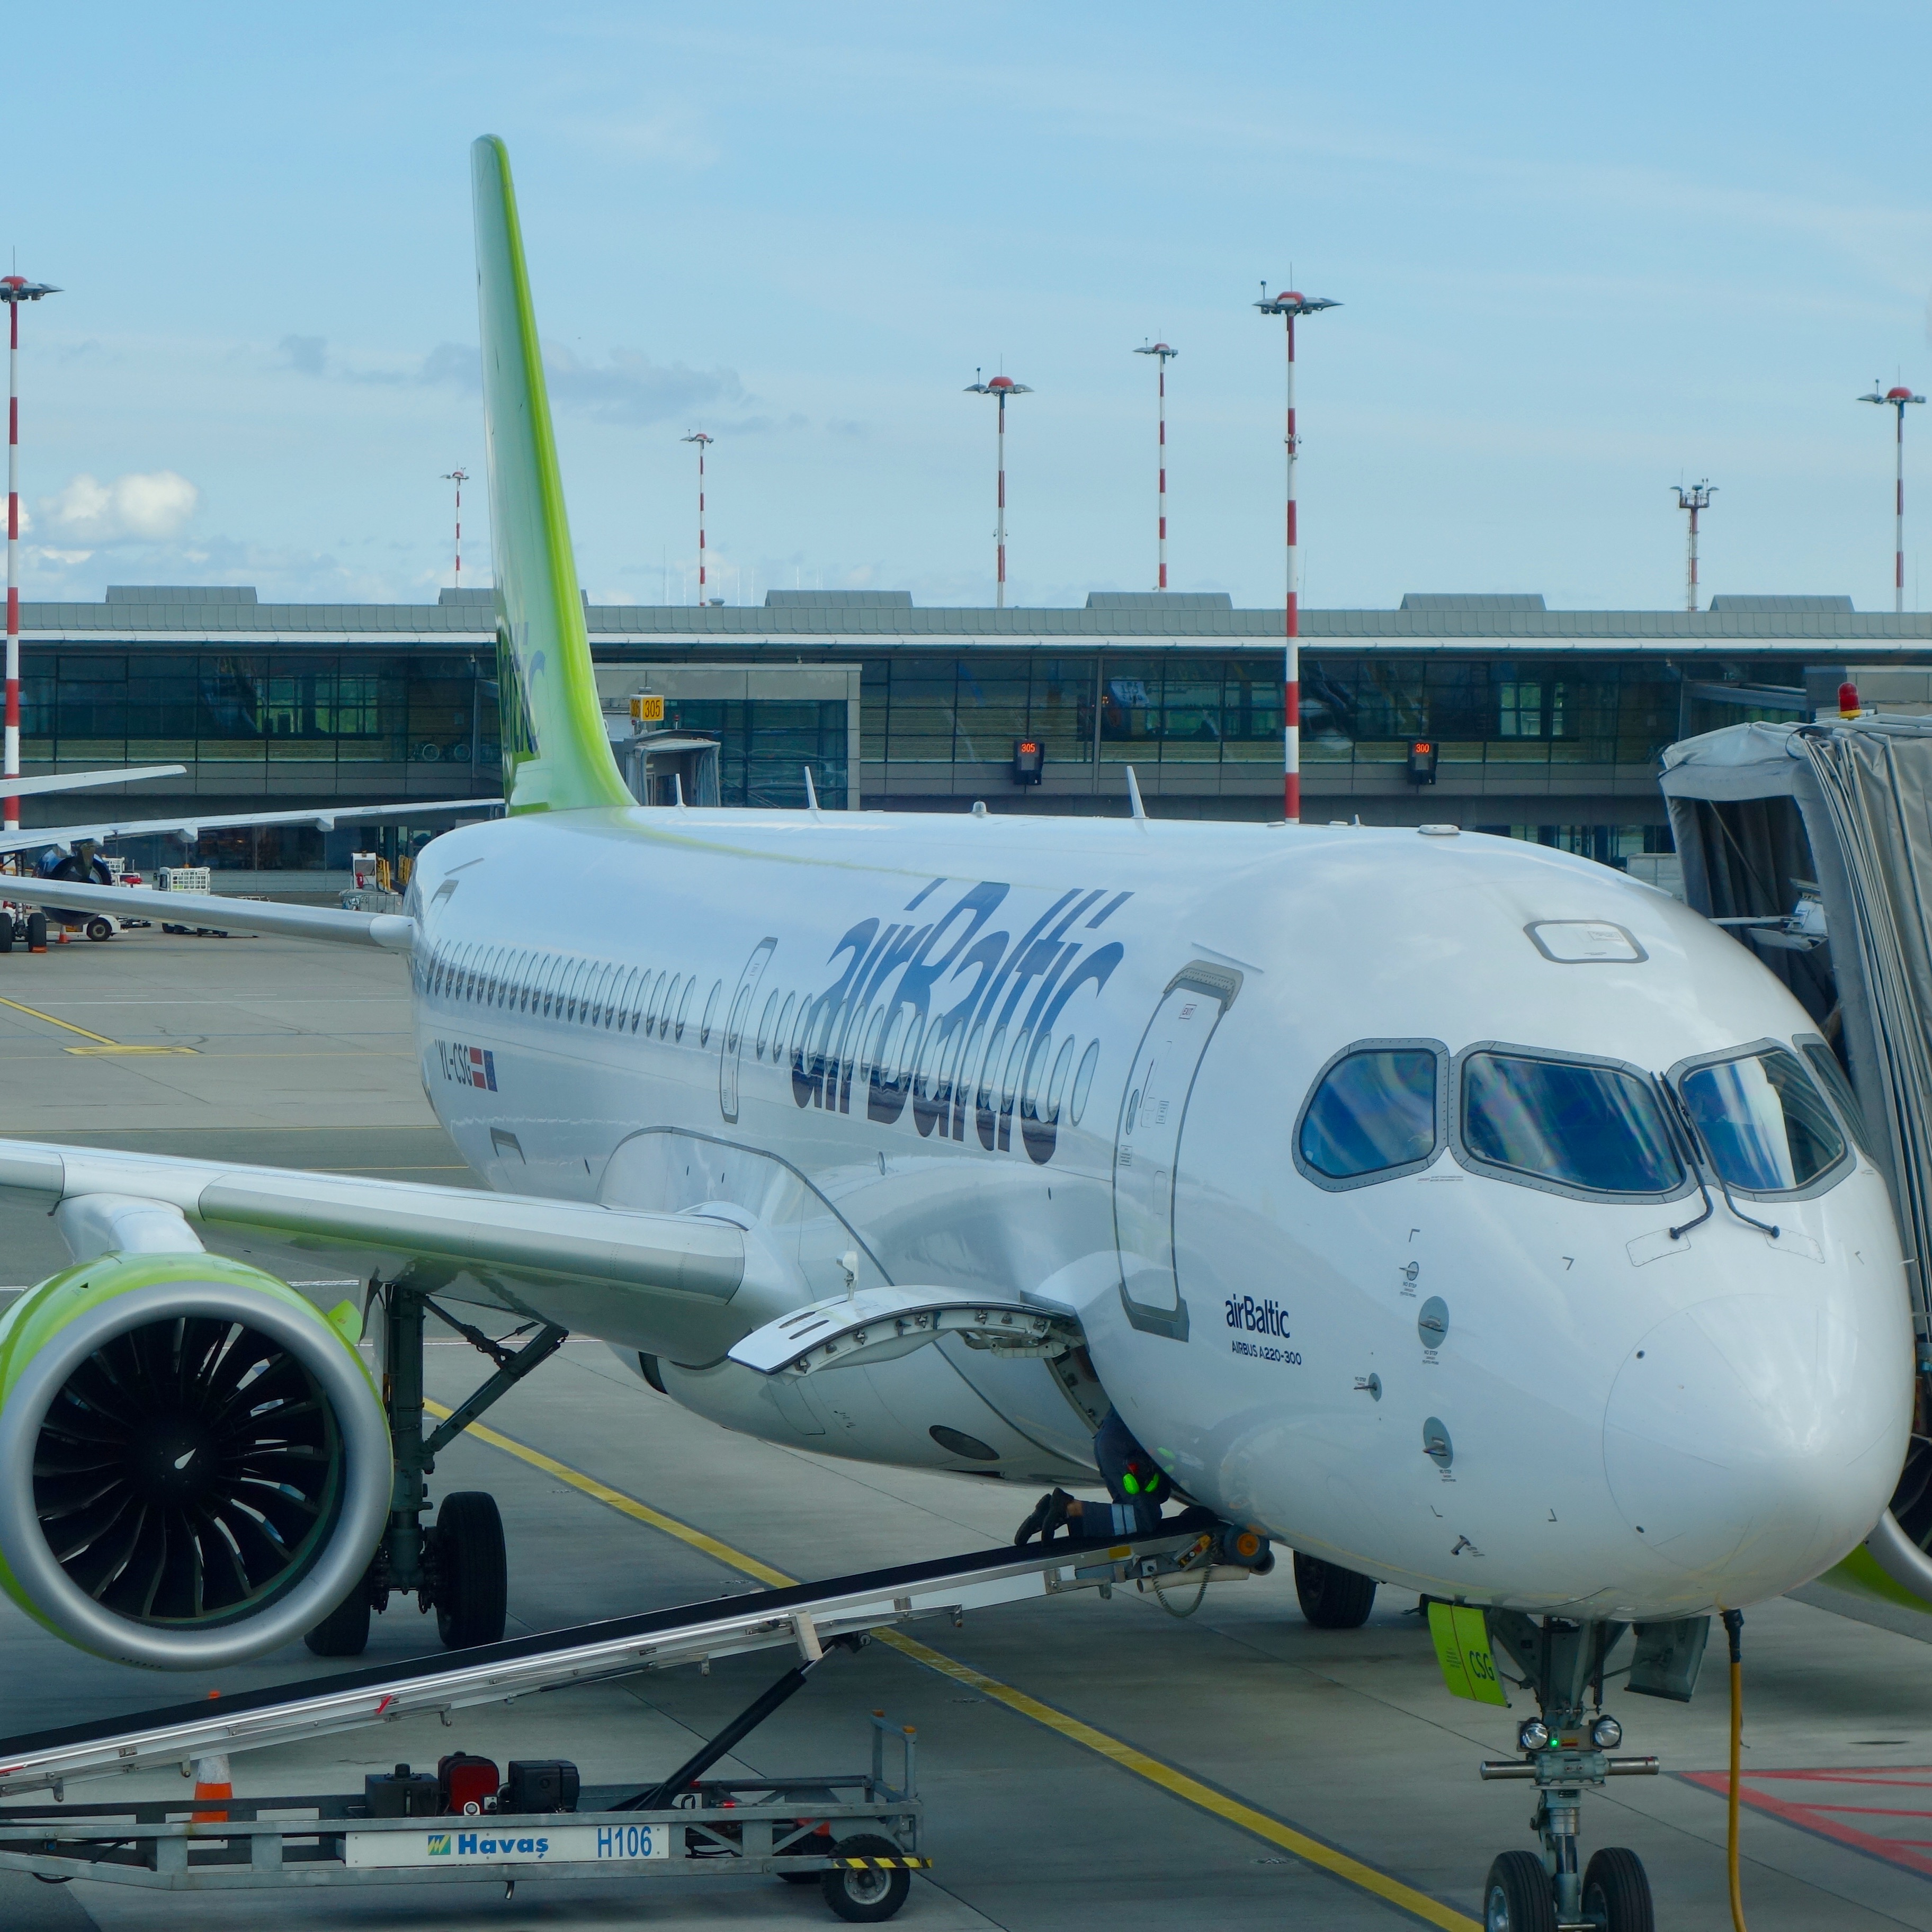 The modern, sleek look of an airBaltic A220 waits at the gate for passengers to board in Riga, Latvia.  The flight deck windows are oversized and shiny turbines of the round engine temporarily quiet.  